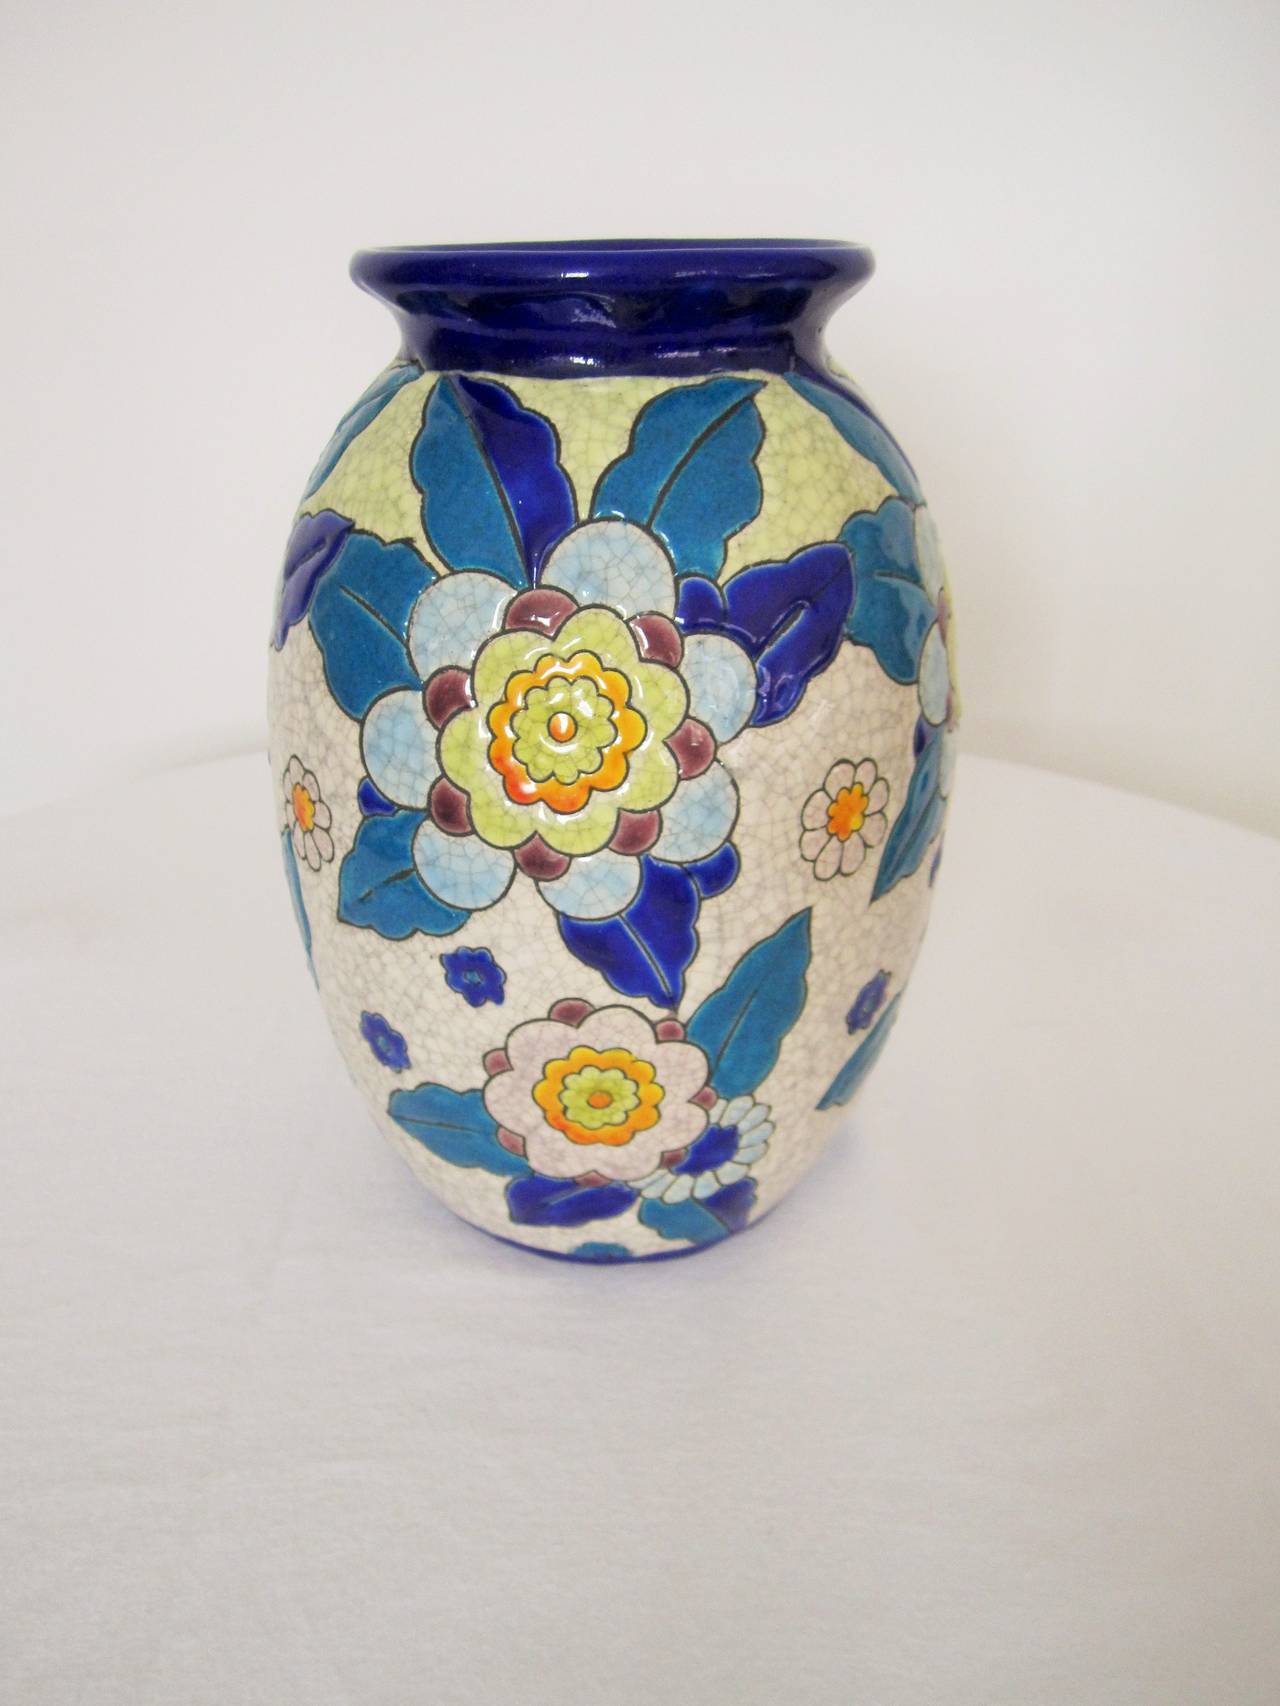 Ceramic Midcentury Floral Pottery Vase in the Style of Boch Freres, Belgium